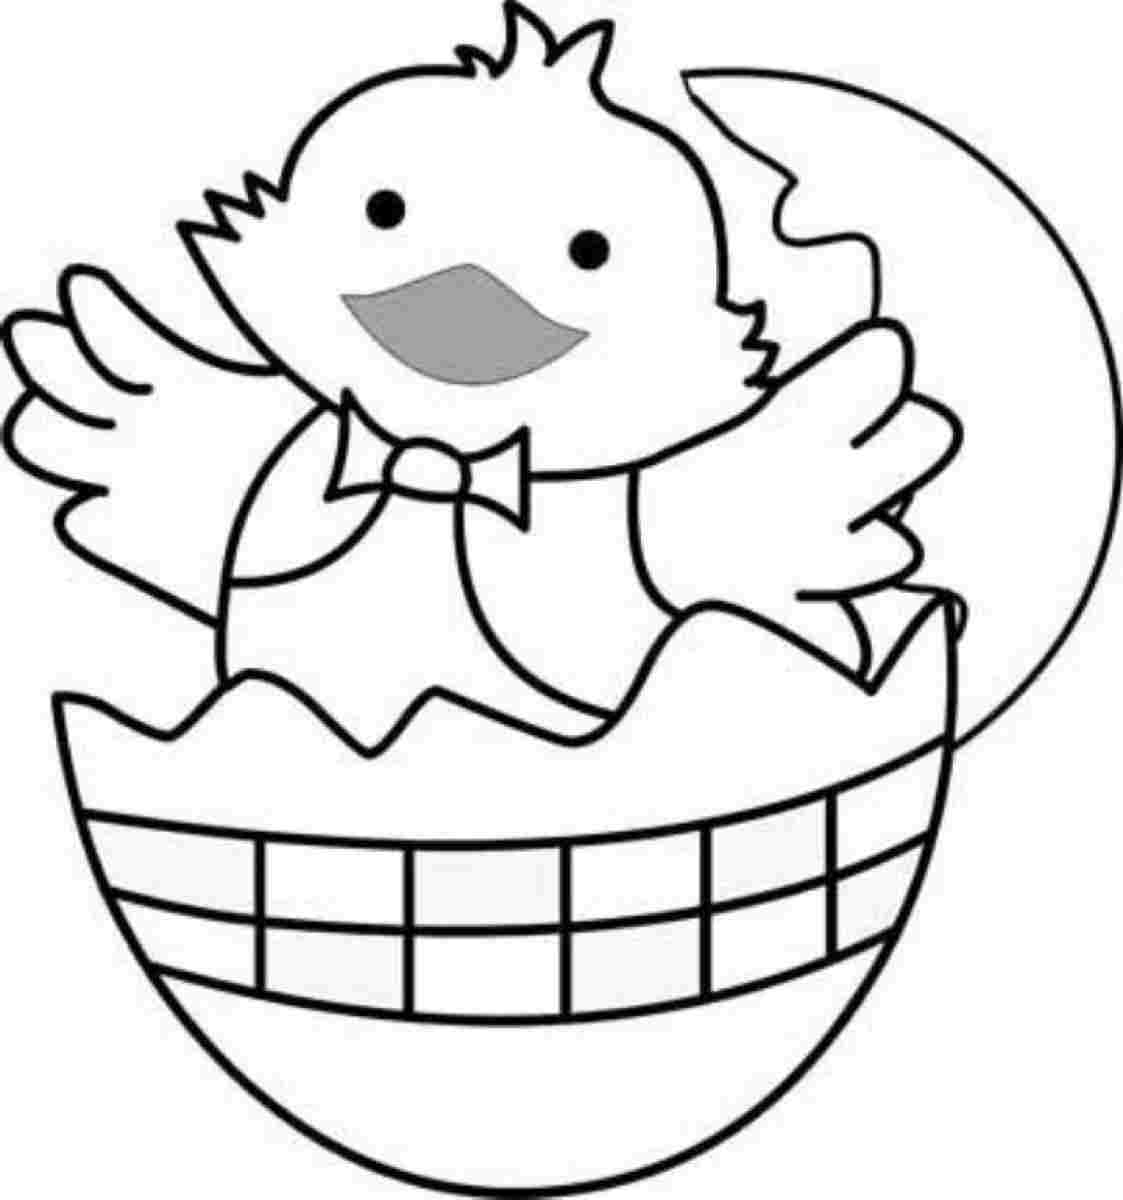 Easter Coloring Pages For Preschoolers at GetDrawings | Free download